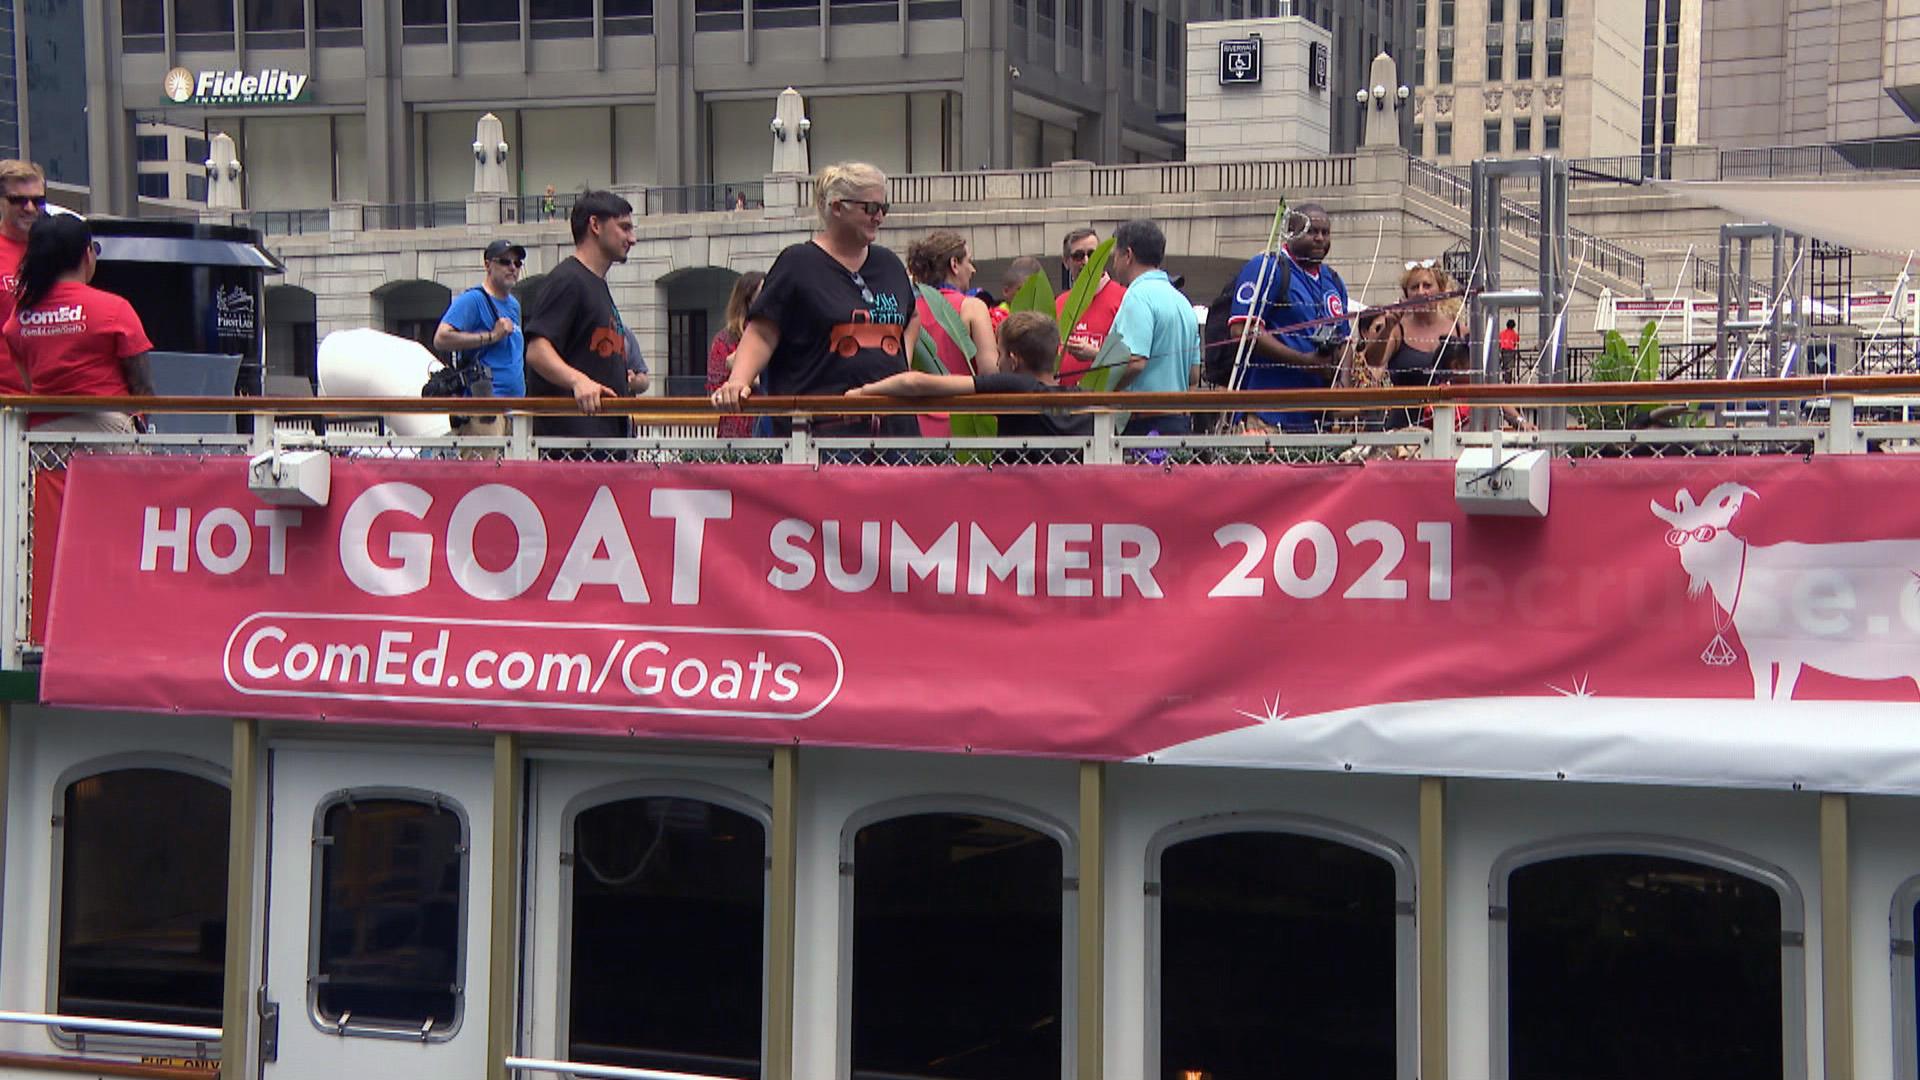 A boat carries two- and four-legged passengers along the Chicago River on Wednesday, July 7, 2021. (WTTW News)